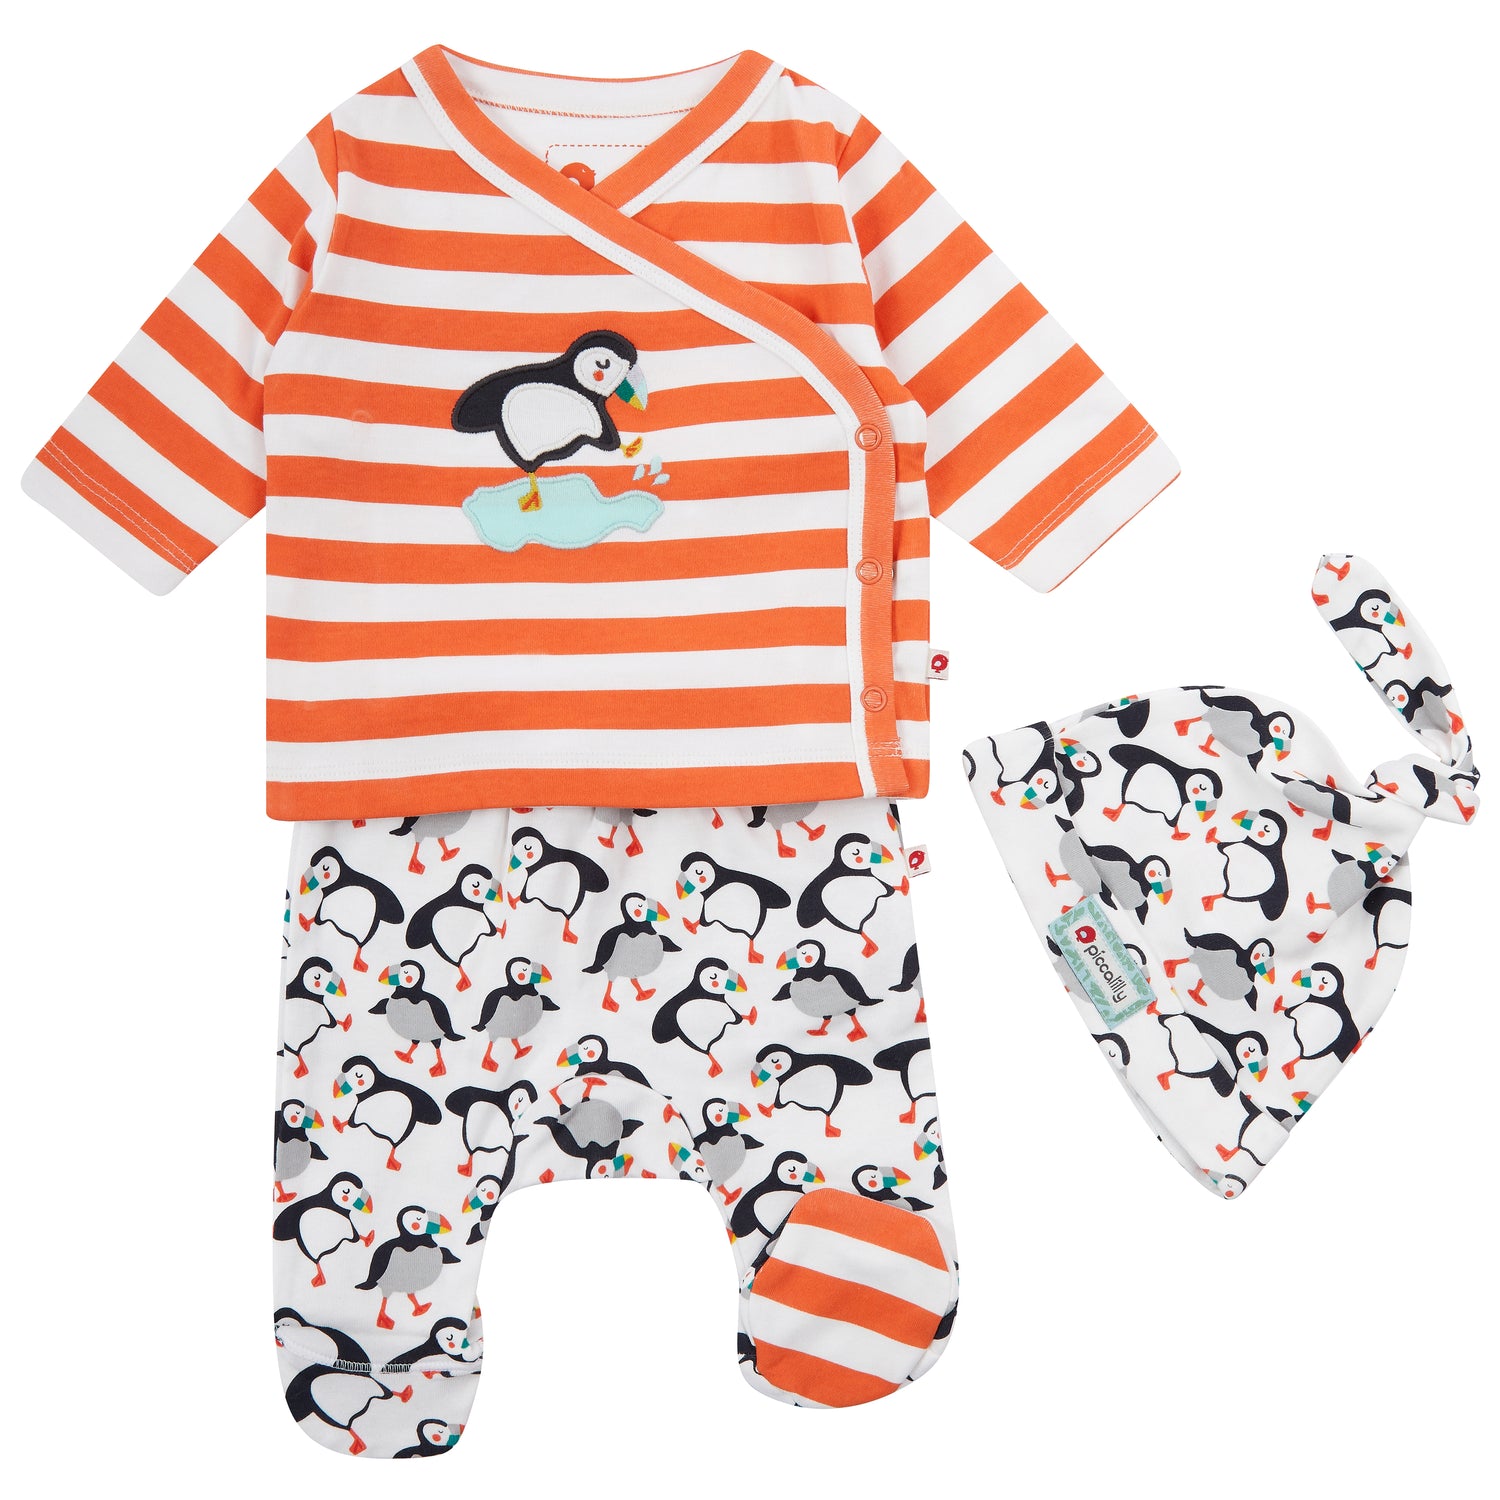 Puffin baby outfit